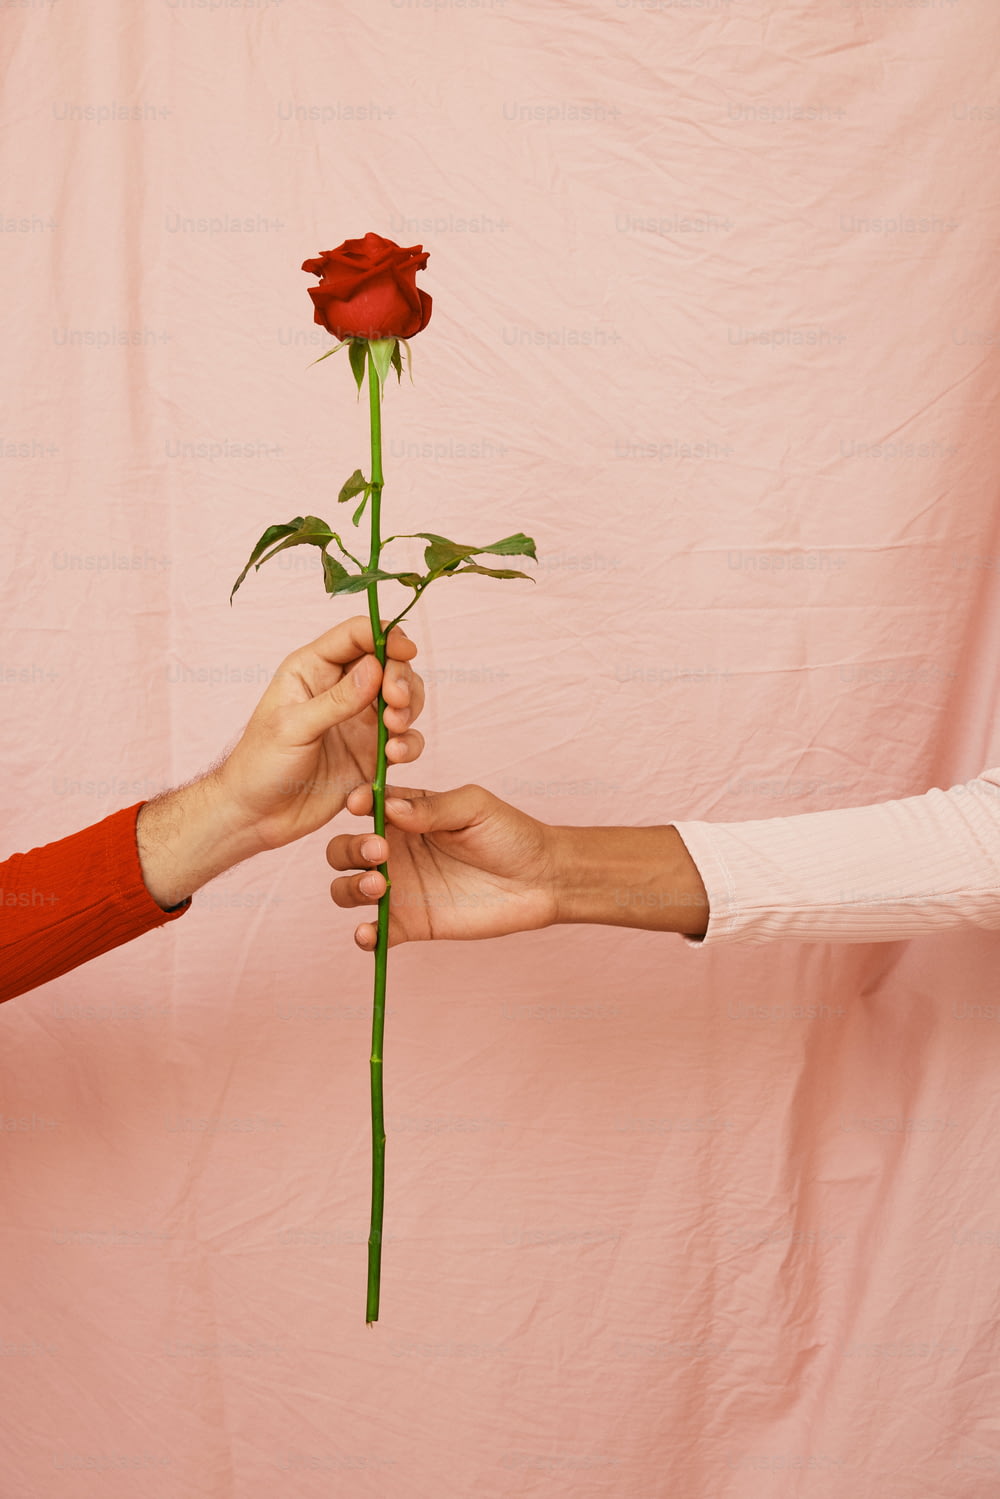 two hands holding a single red rose against a pink background